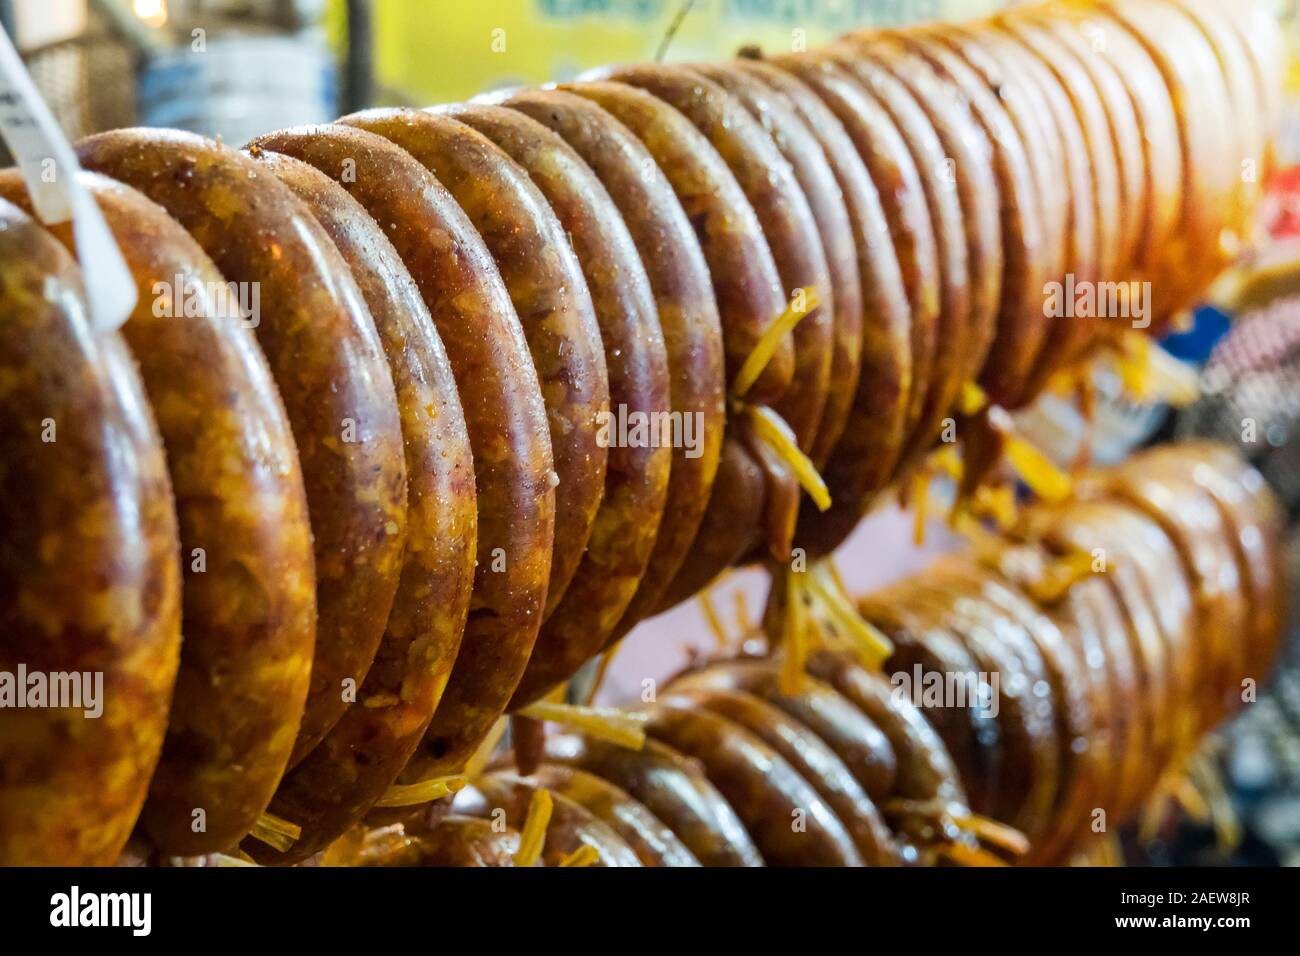 Smoked sausage hanging over the grill. The process of Smoking sausage. Cooking street food on grill Stock Photo